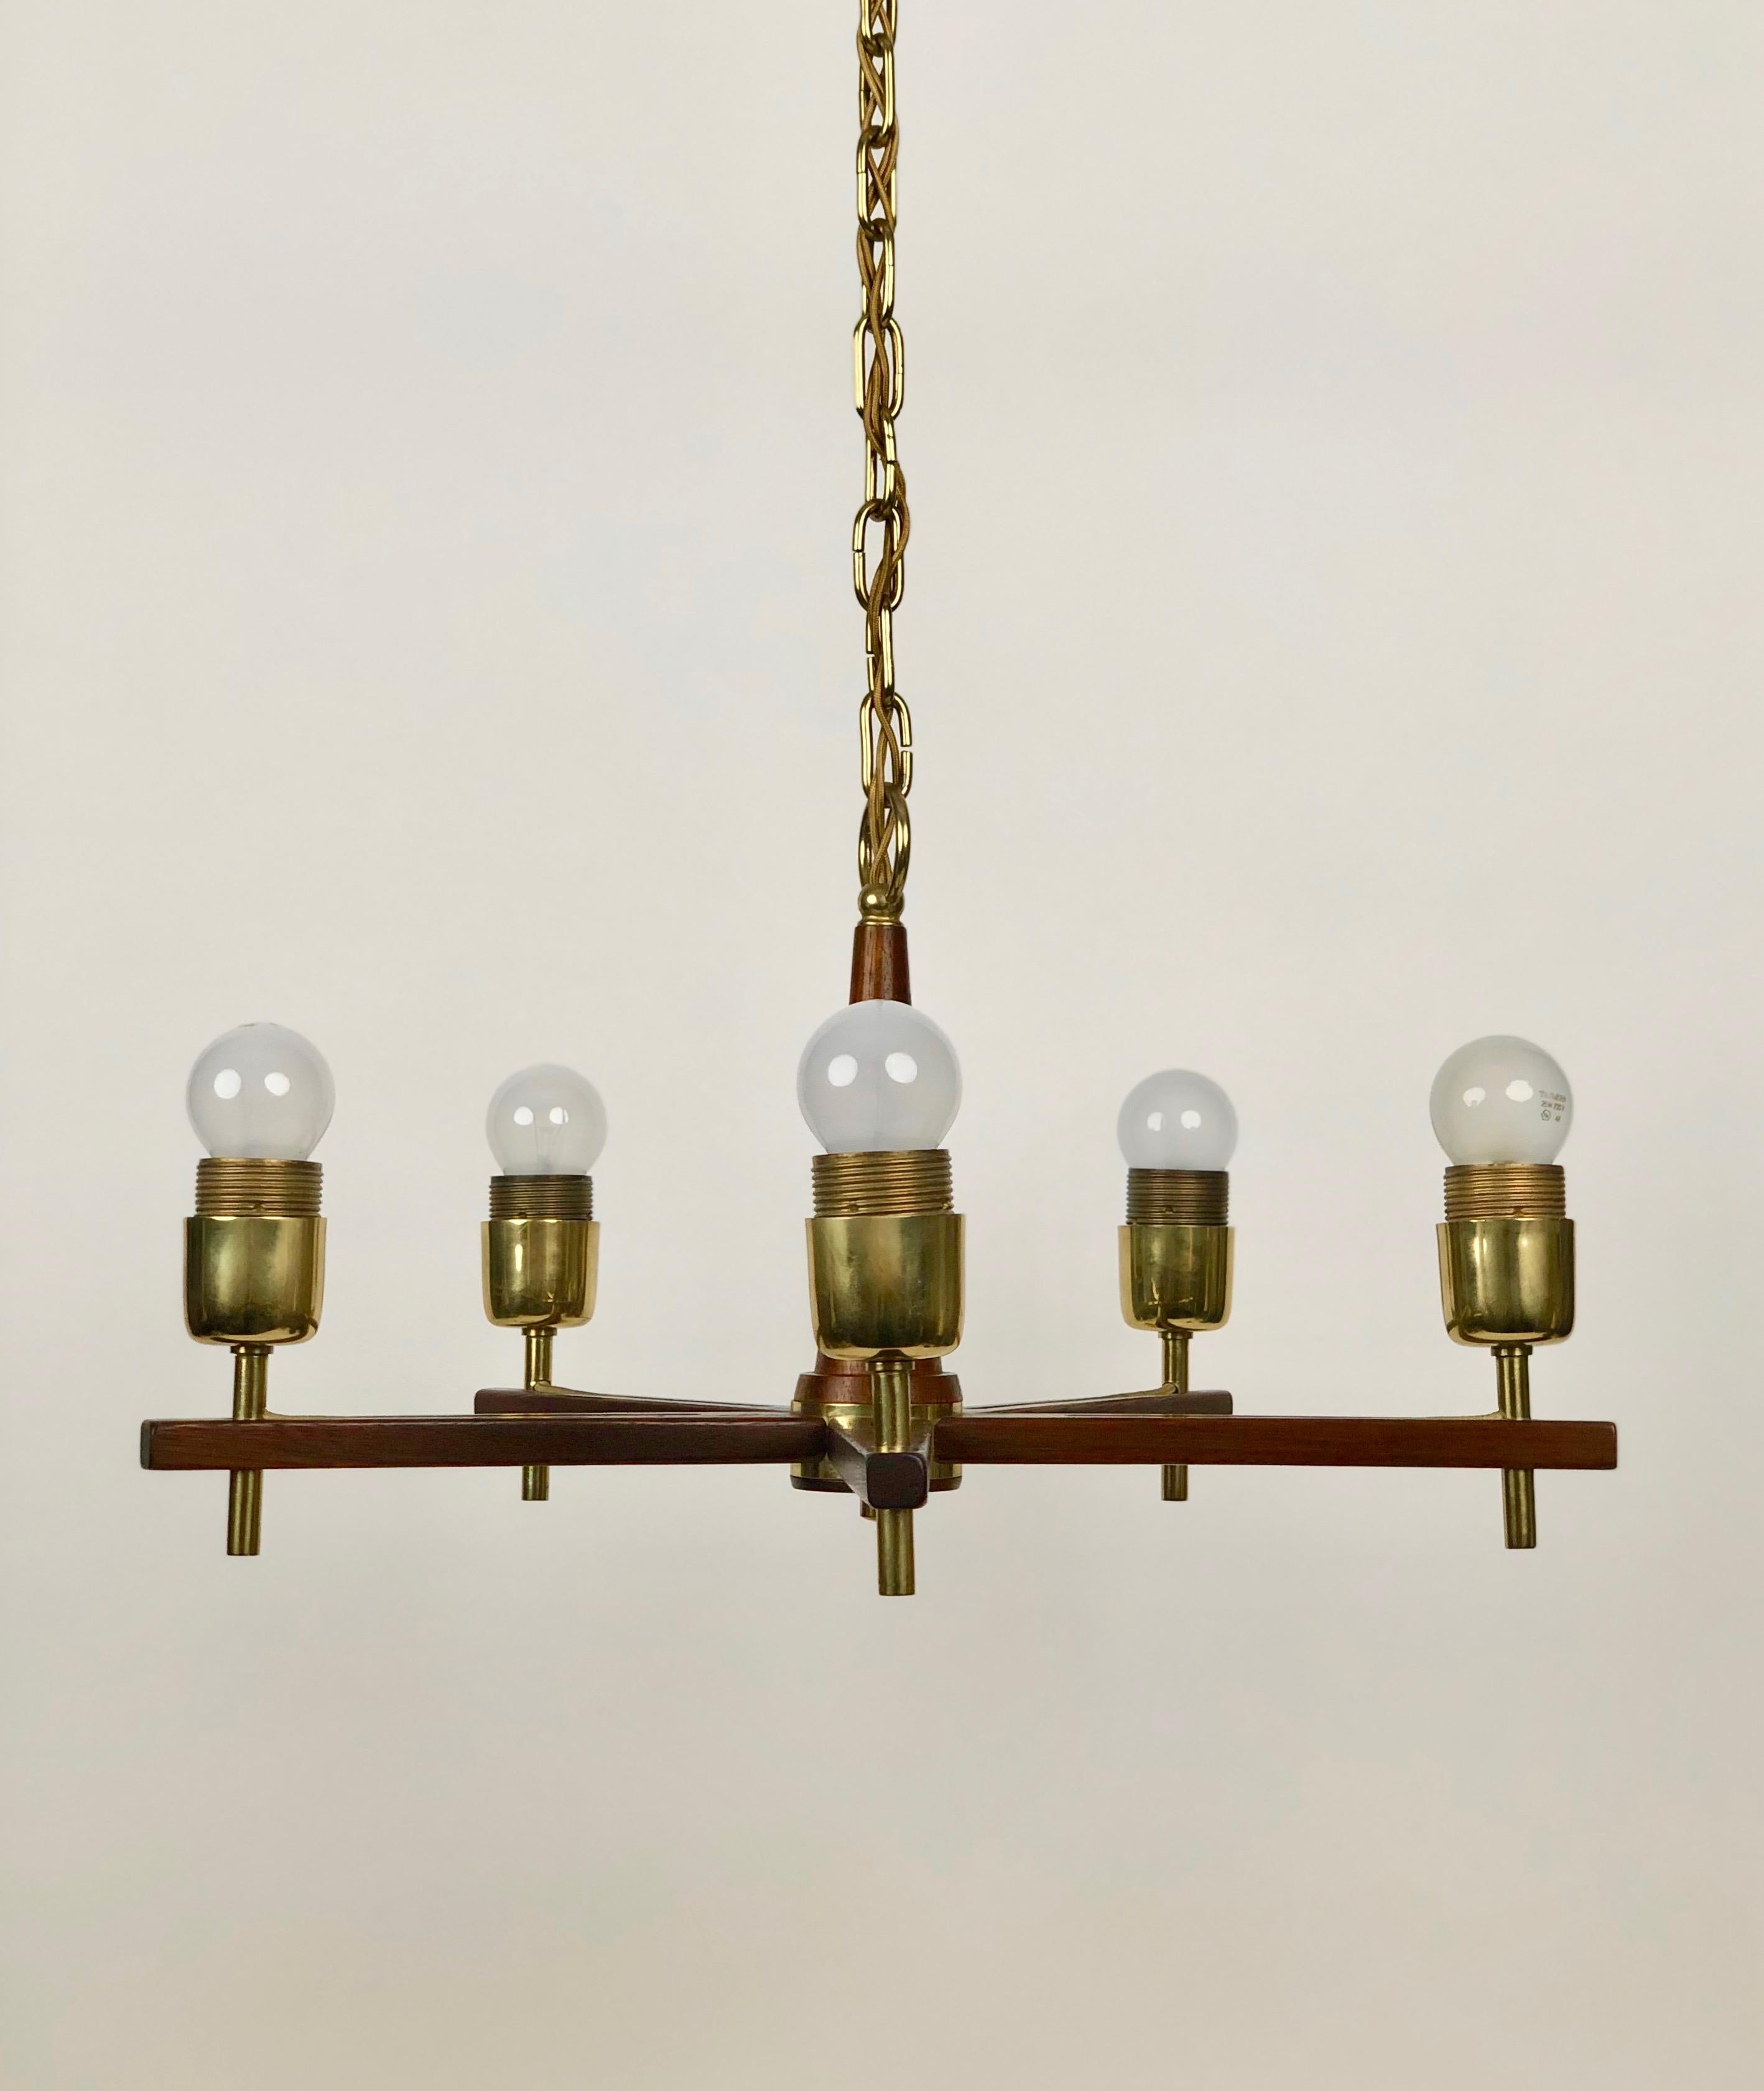 Five Arms Chandelier in Teak Wood and Brass with Cane Shades, 1960, Austria For Sale 3